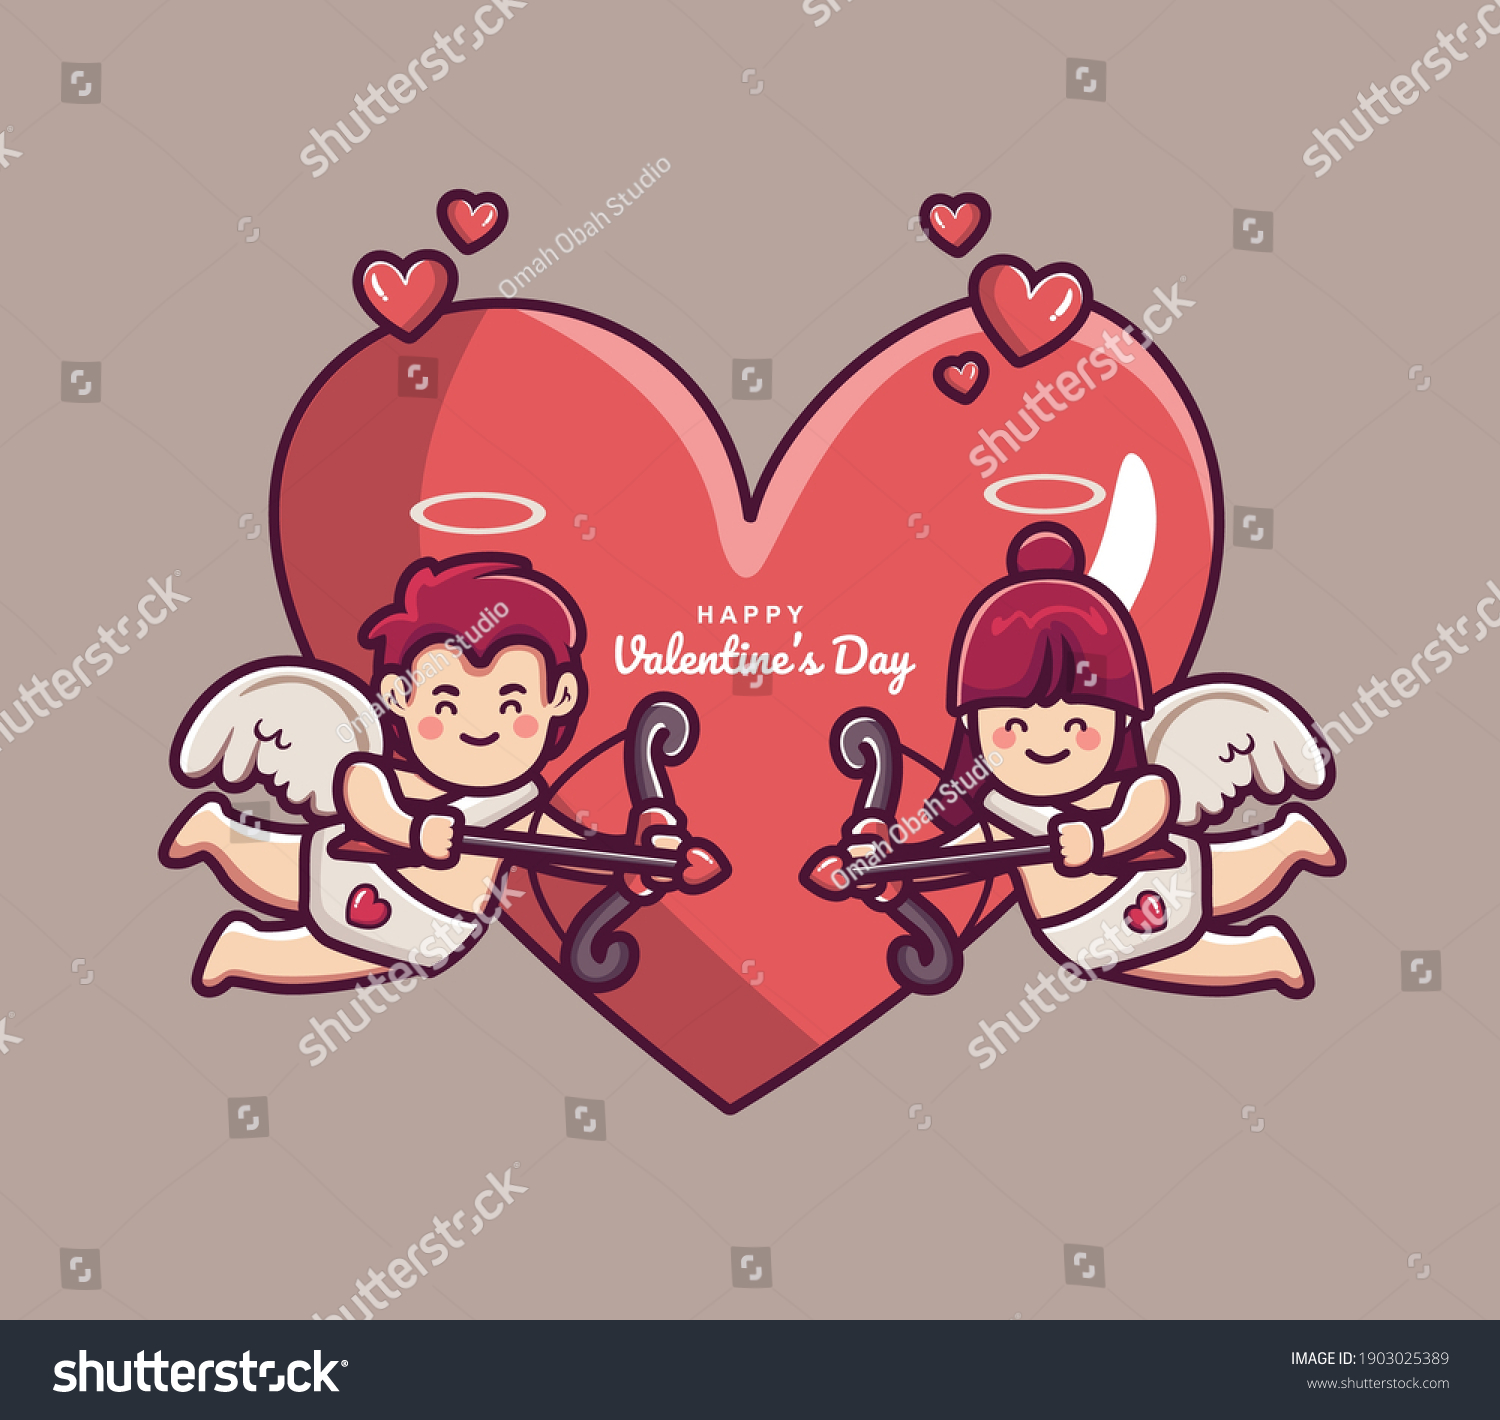 Cute Couple Cupid Holding Arrow Hearth Stock Vector Royalty Free 1903025389 Shutterstock 9888